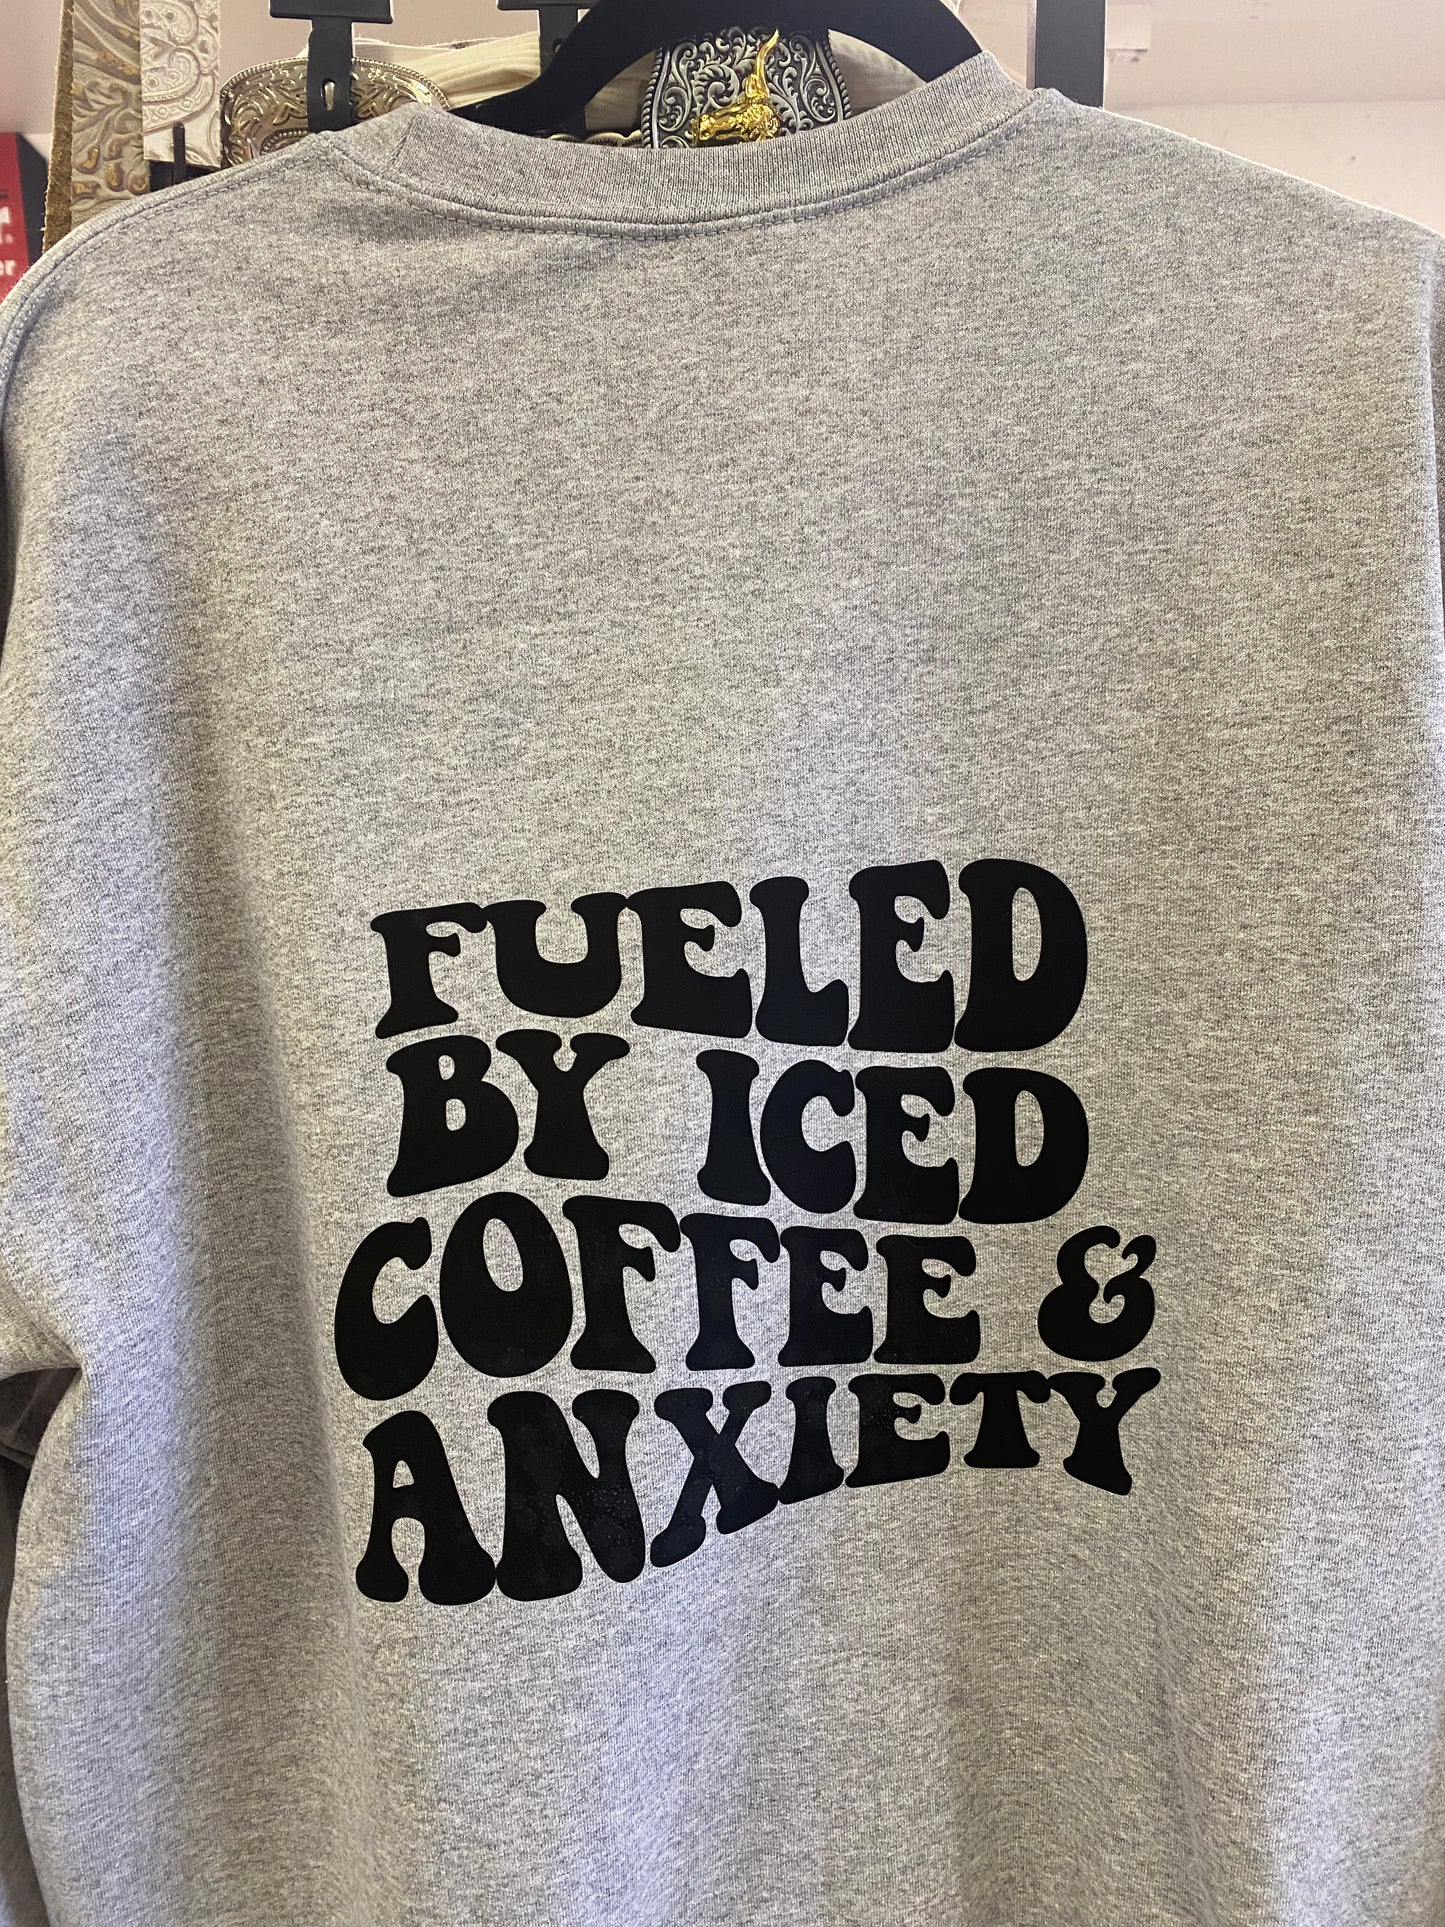 Fueled by coffee and anxiety crew